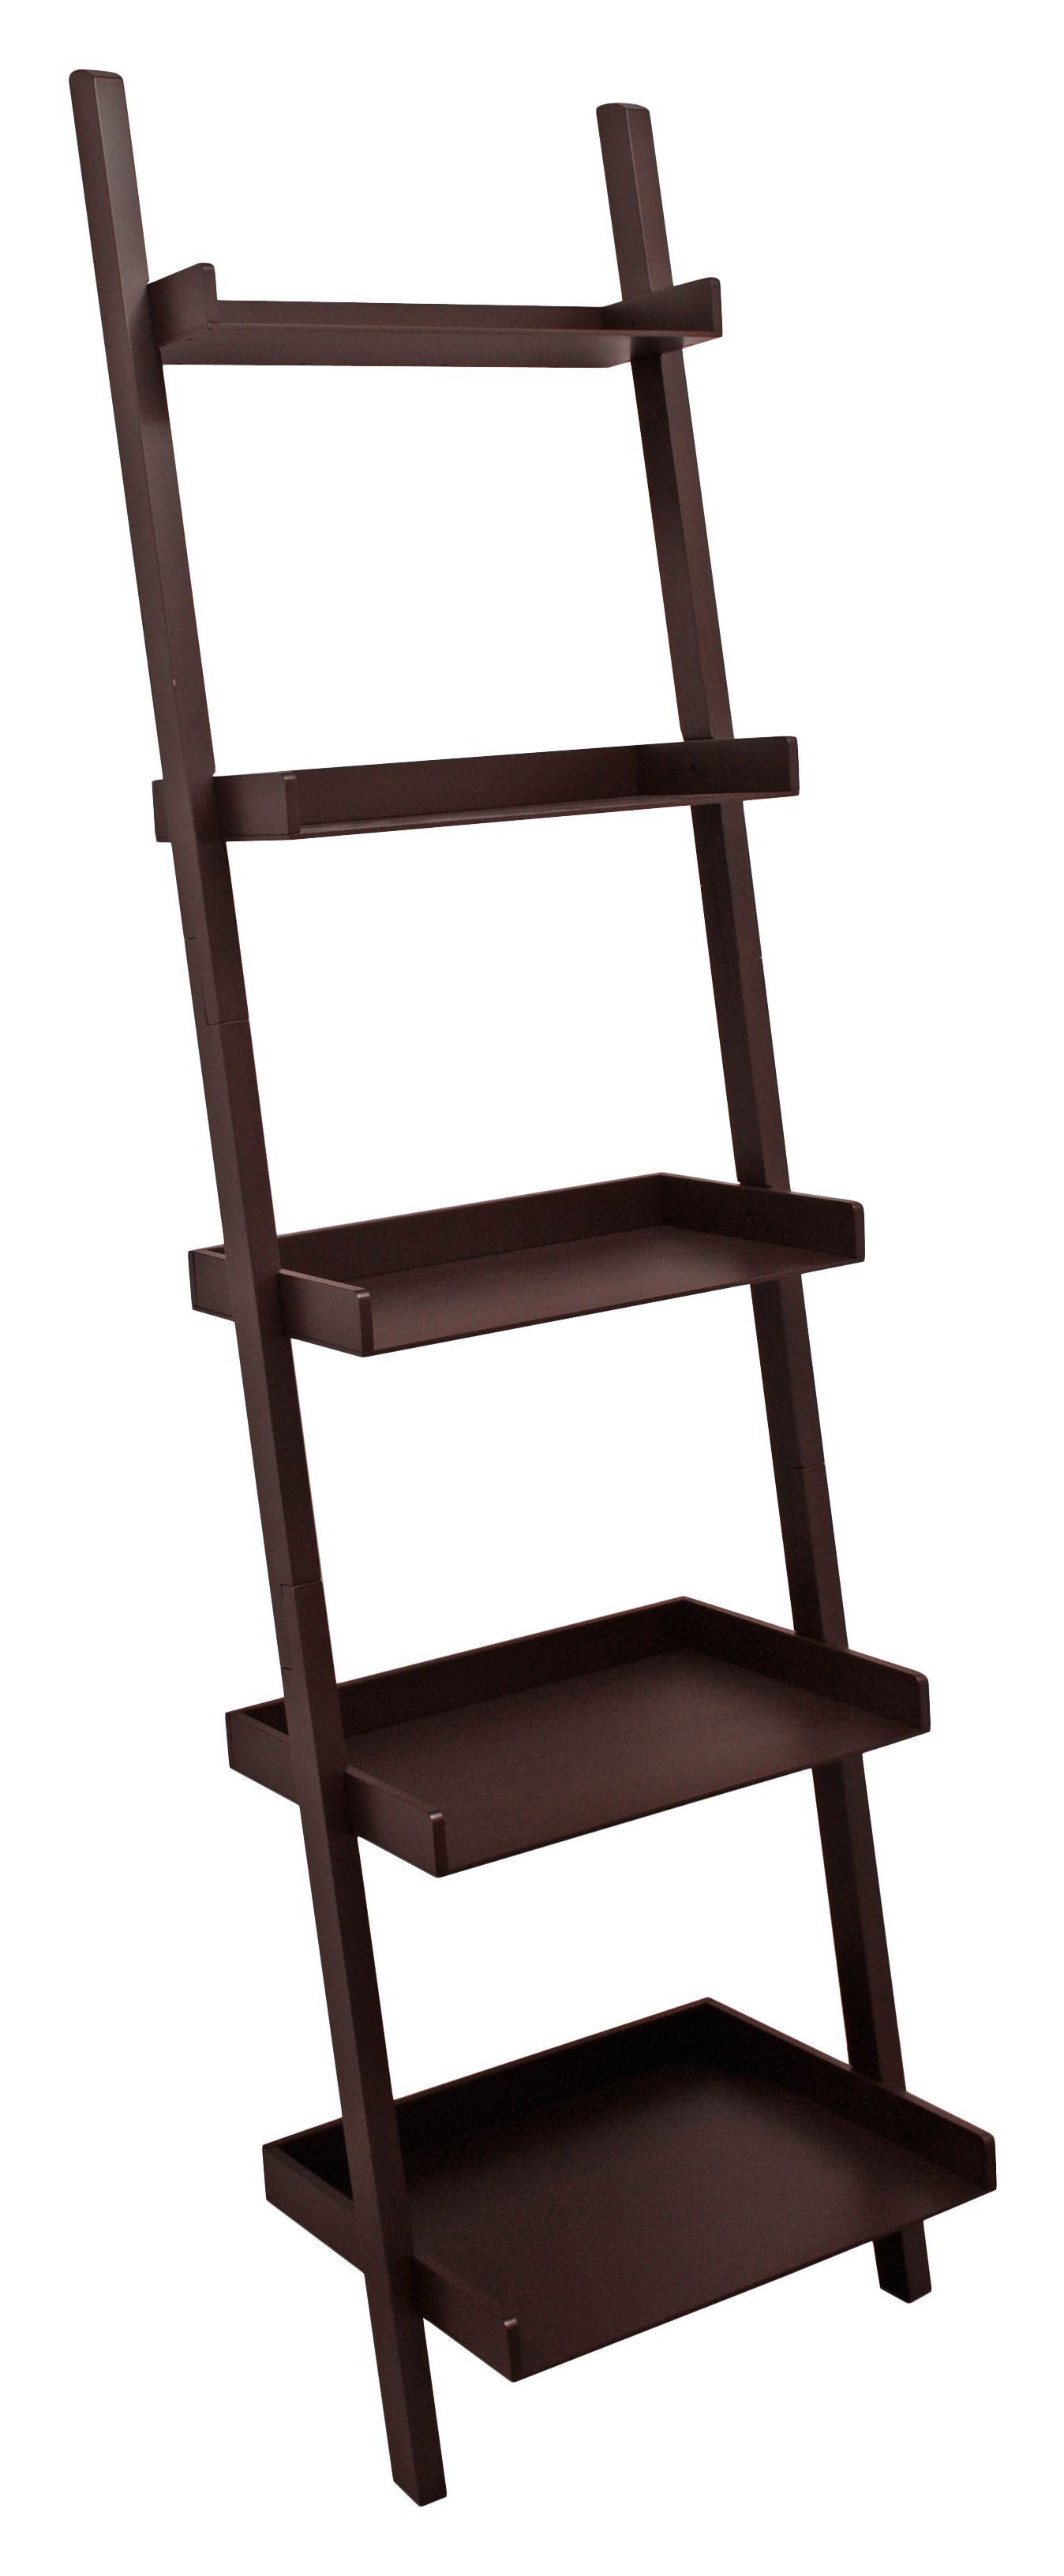 Current Pfaff 5 Tier Ladder Bookcase Throughout Silvestri Ladder Bookcases (View 13 of 20)